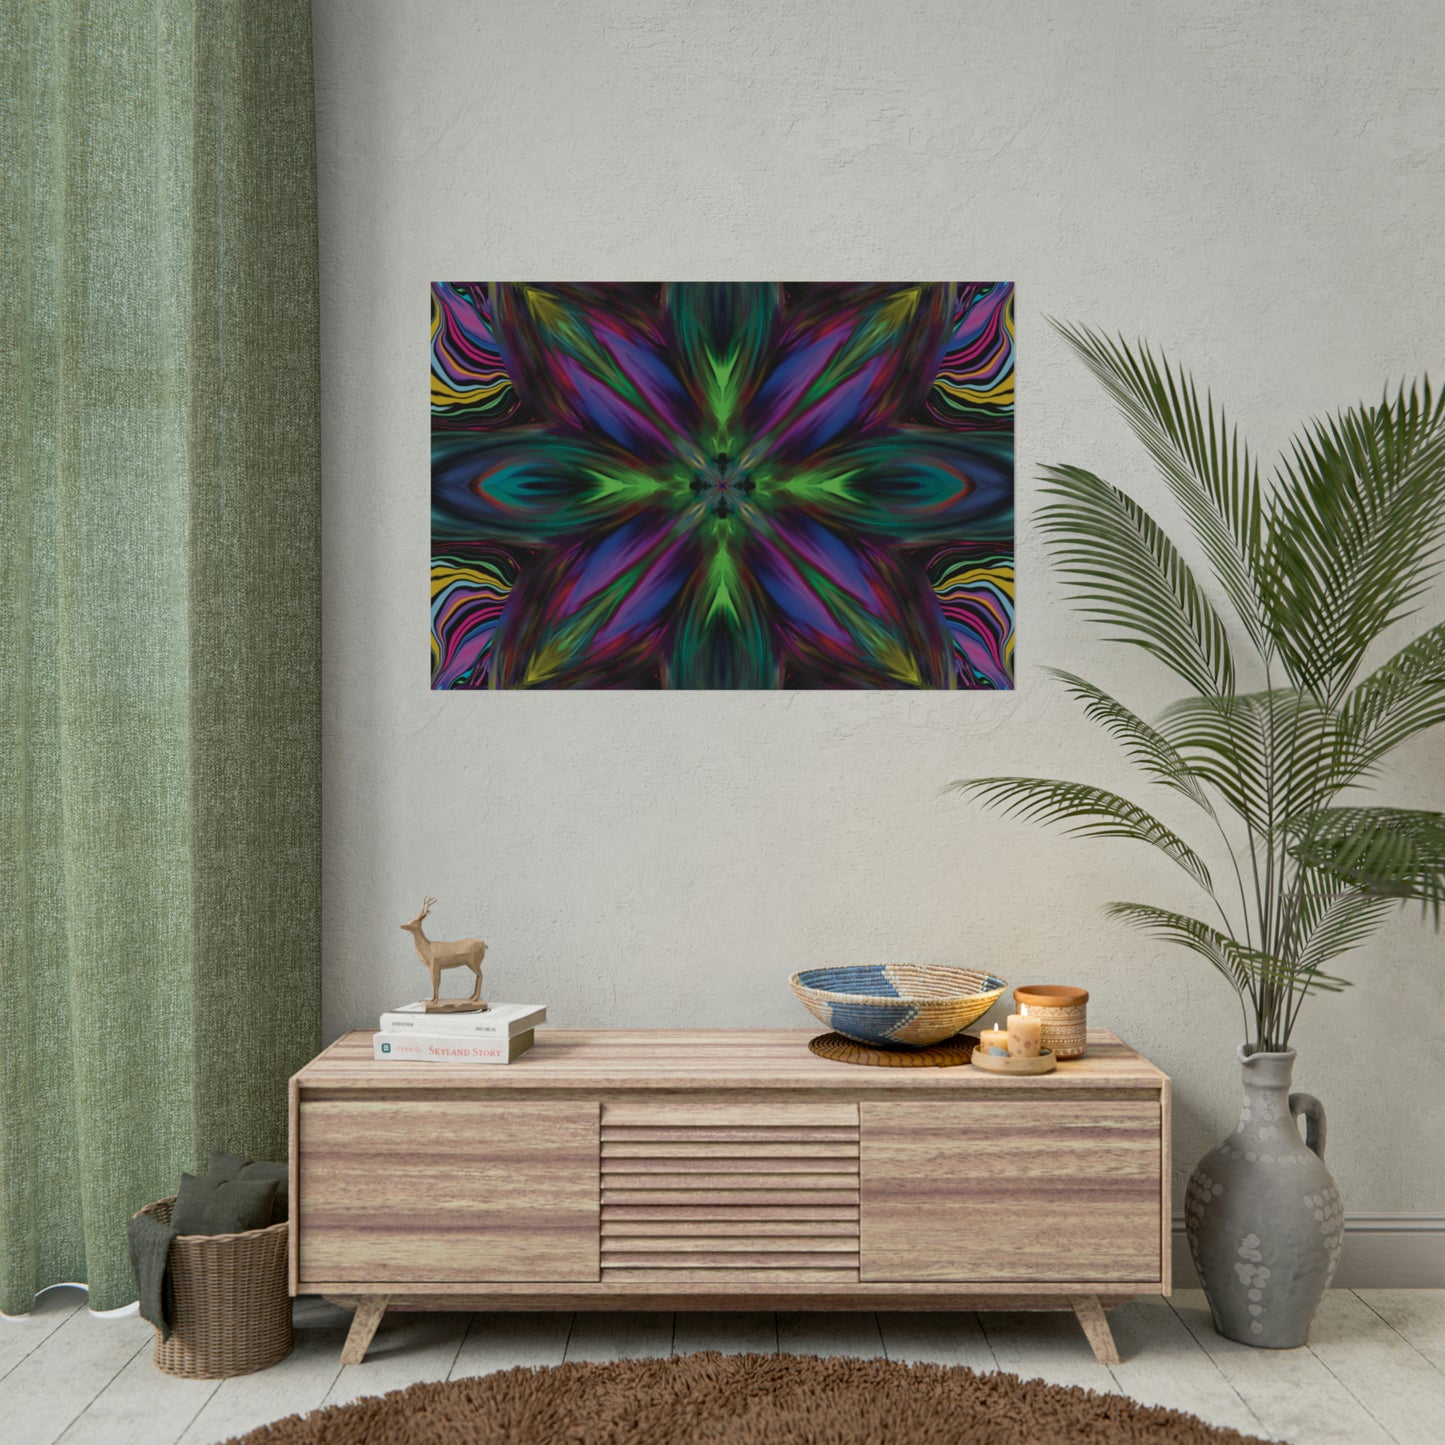 Rainbow Abstract Flower Energy Art Poster - Portal to Relaxation and Imagination